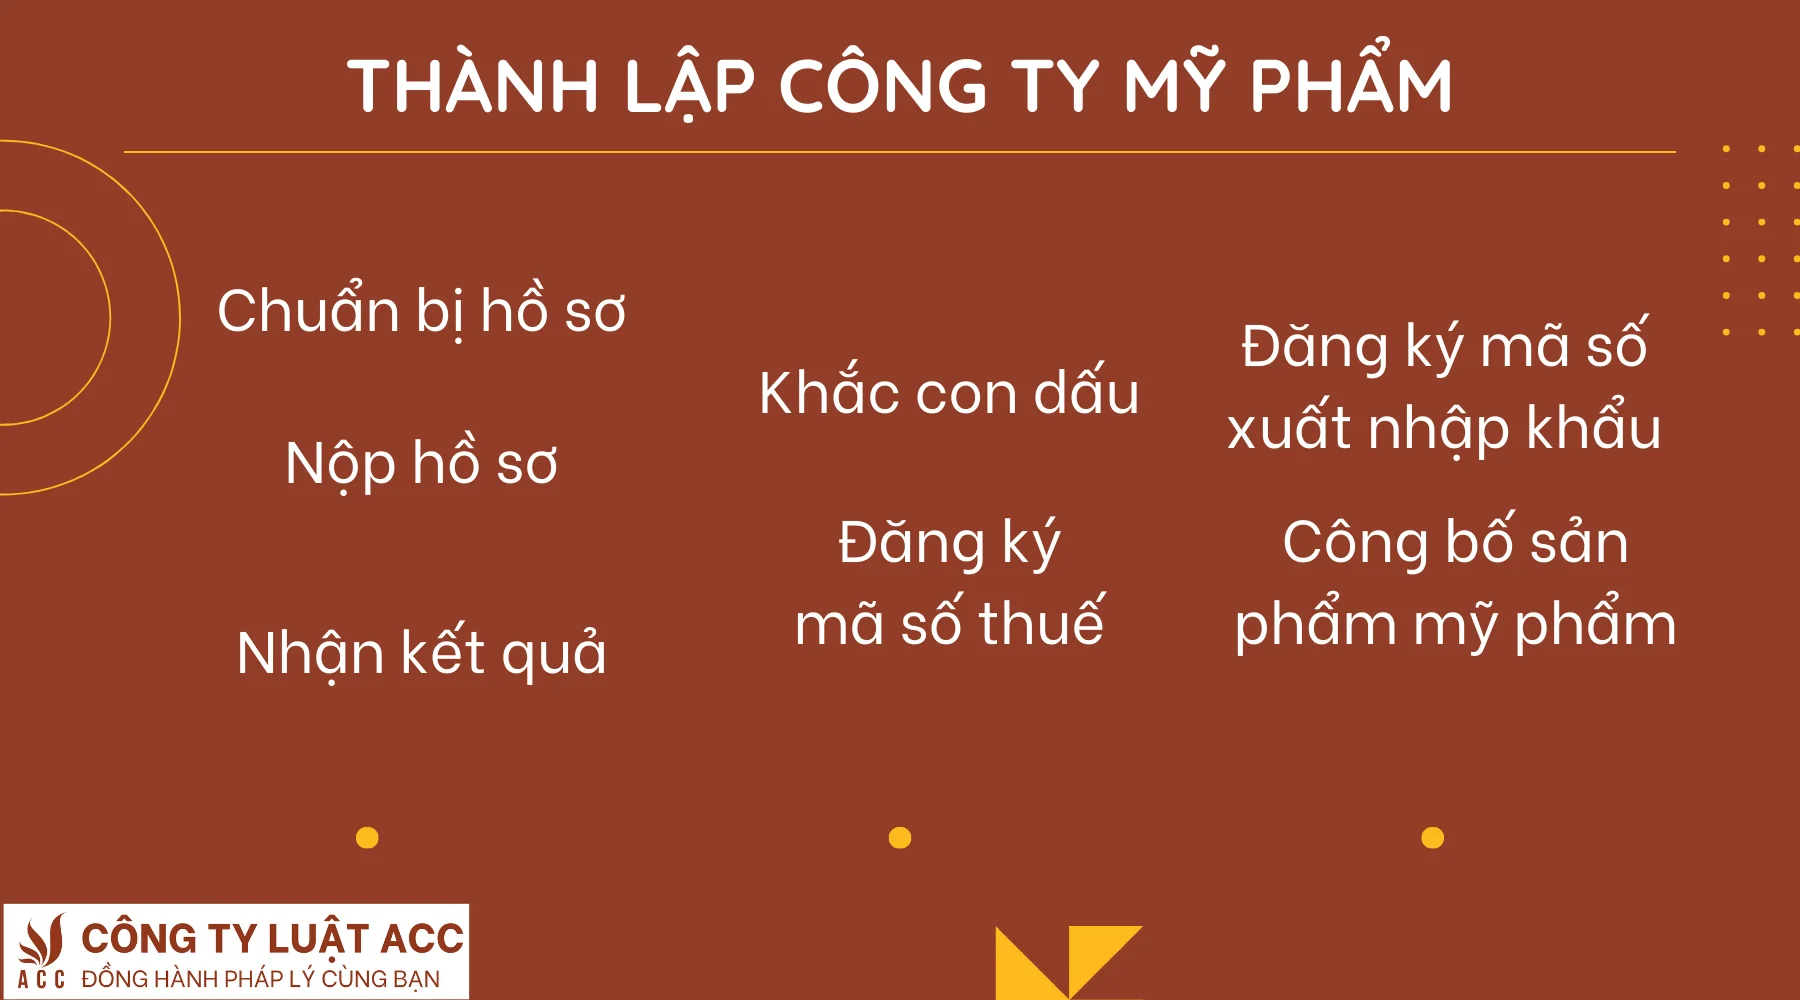 thanh-lap-cong-ty-my-pham-1